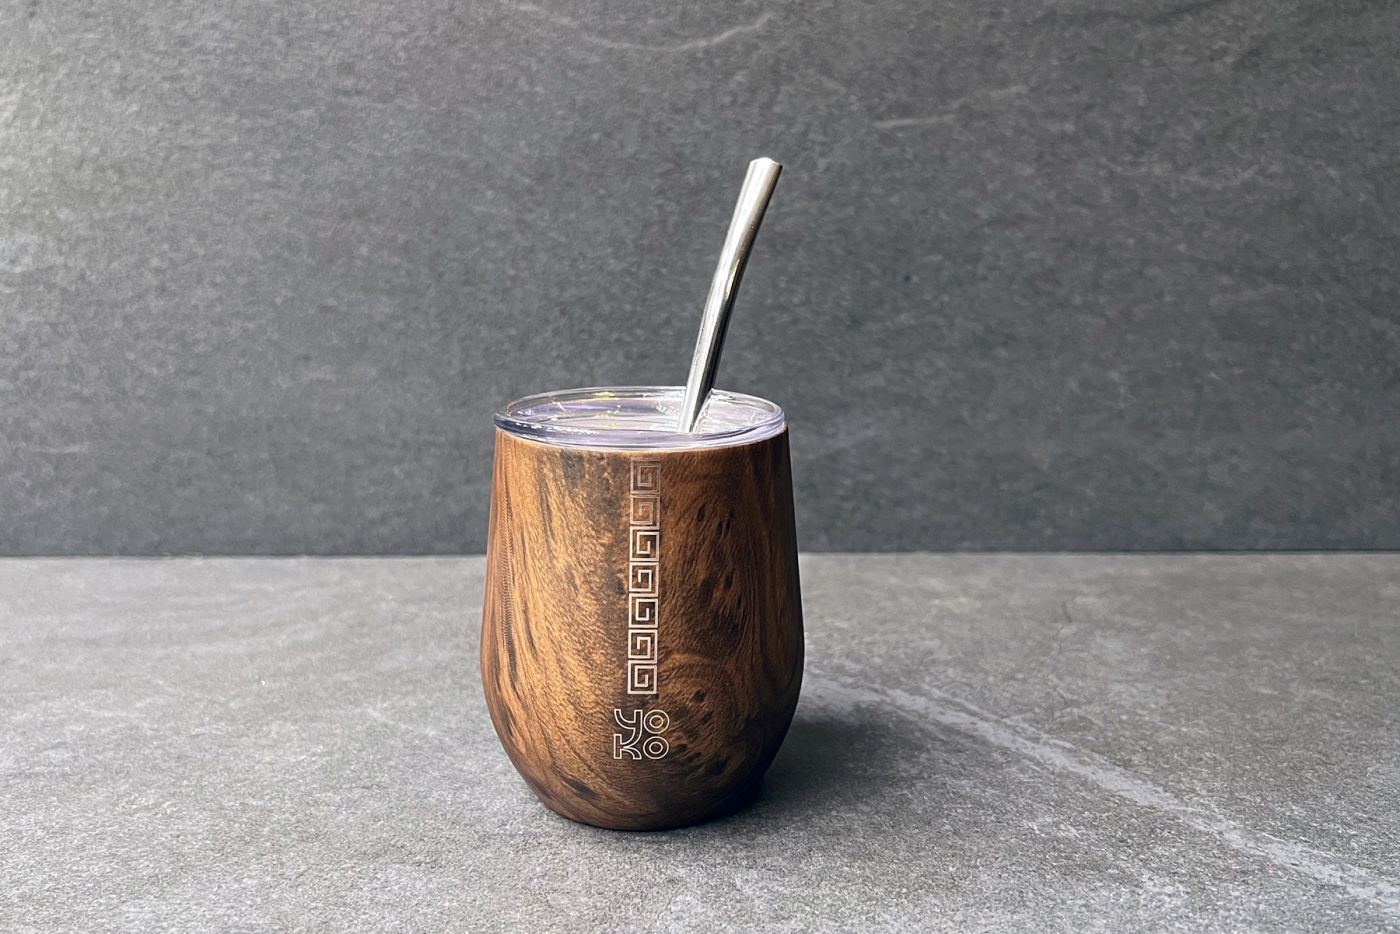 Wood Effect Yerbamate Cup and Straw